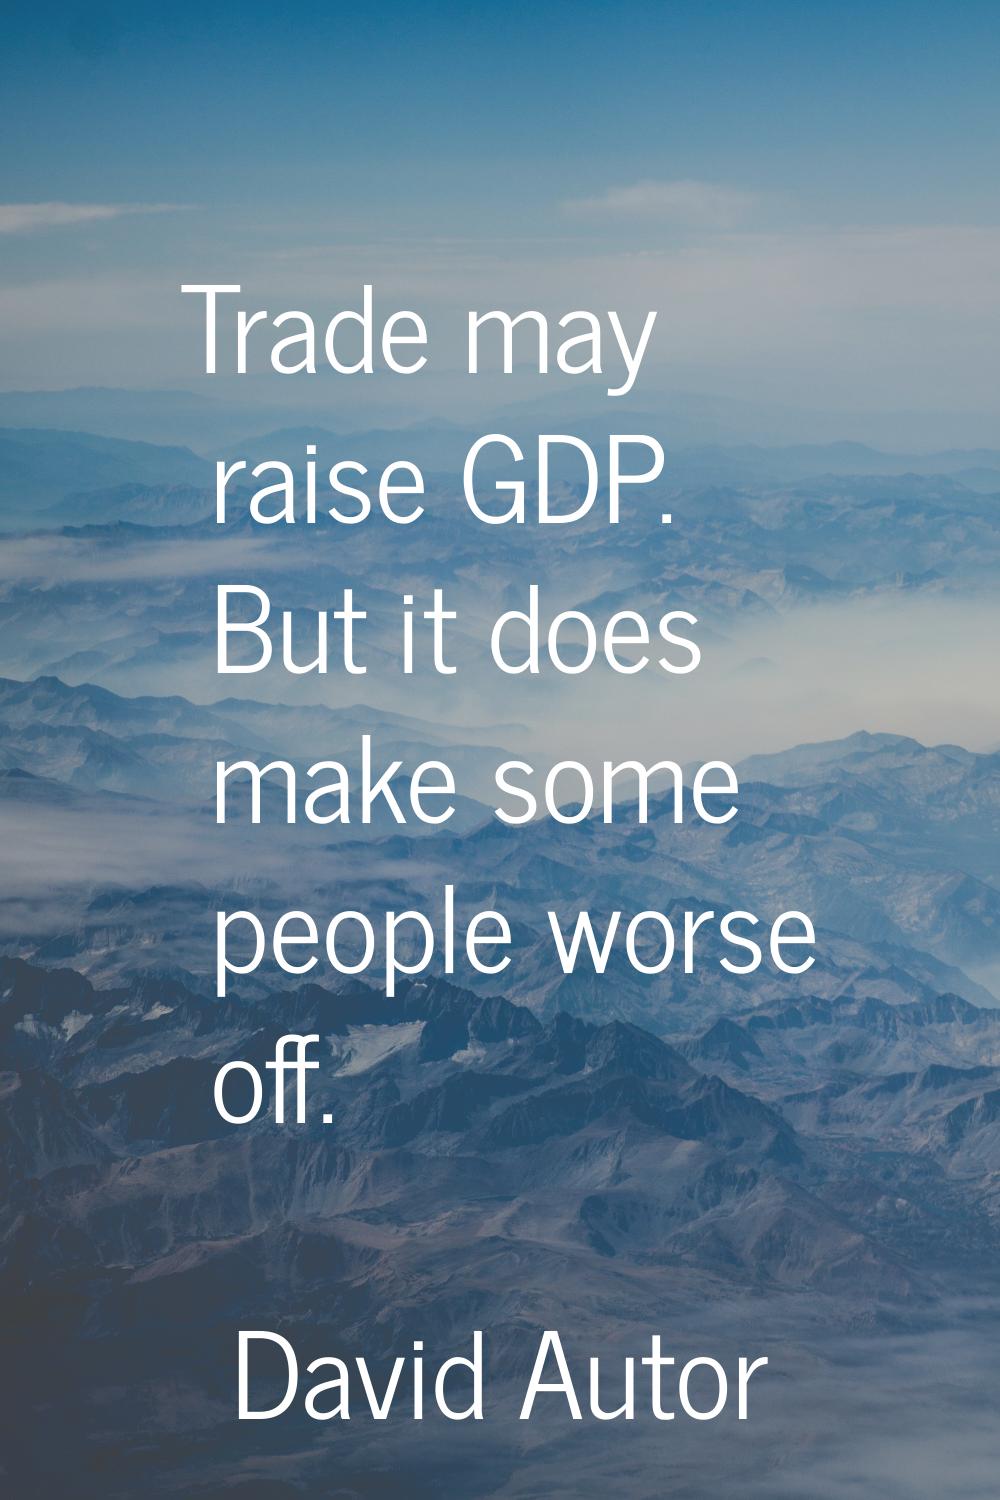 Trade may raise GDP. But it does make some people worse off.